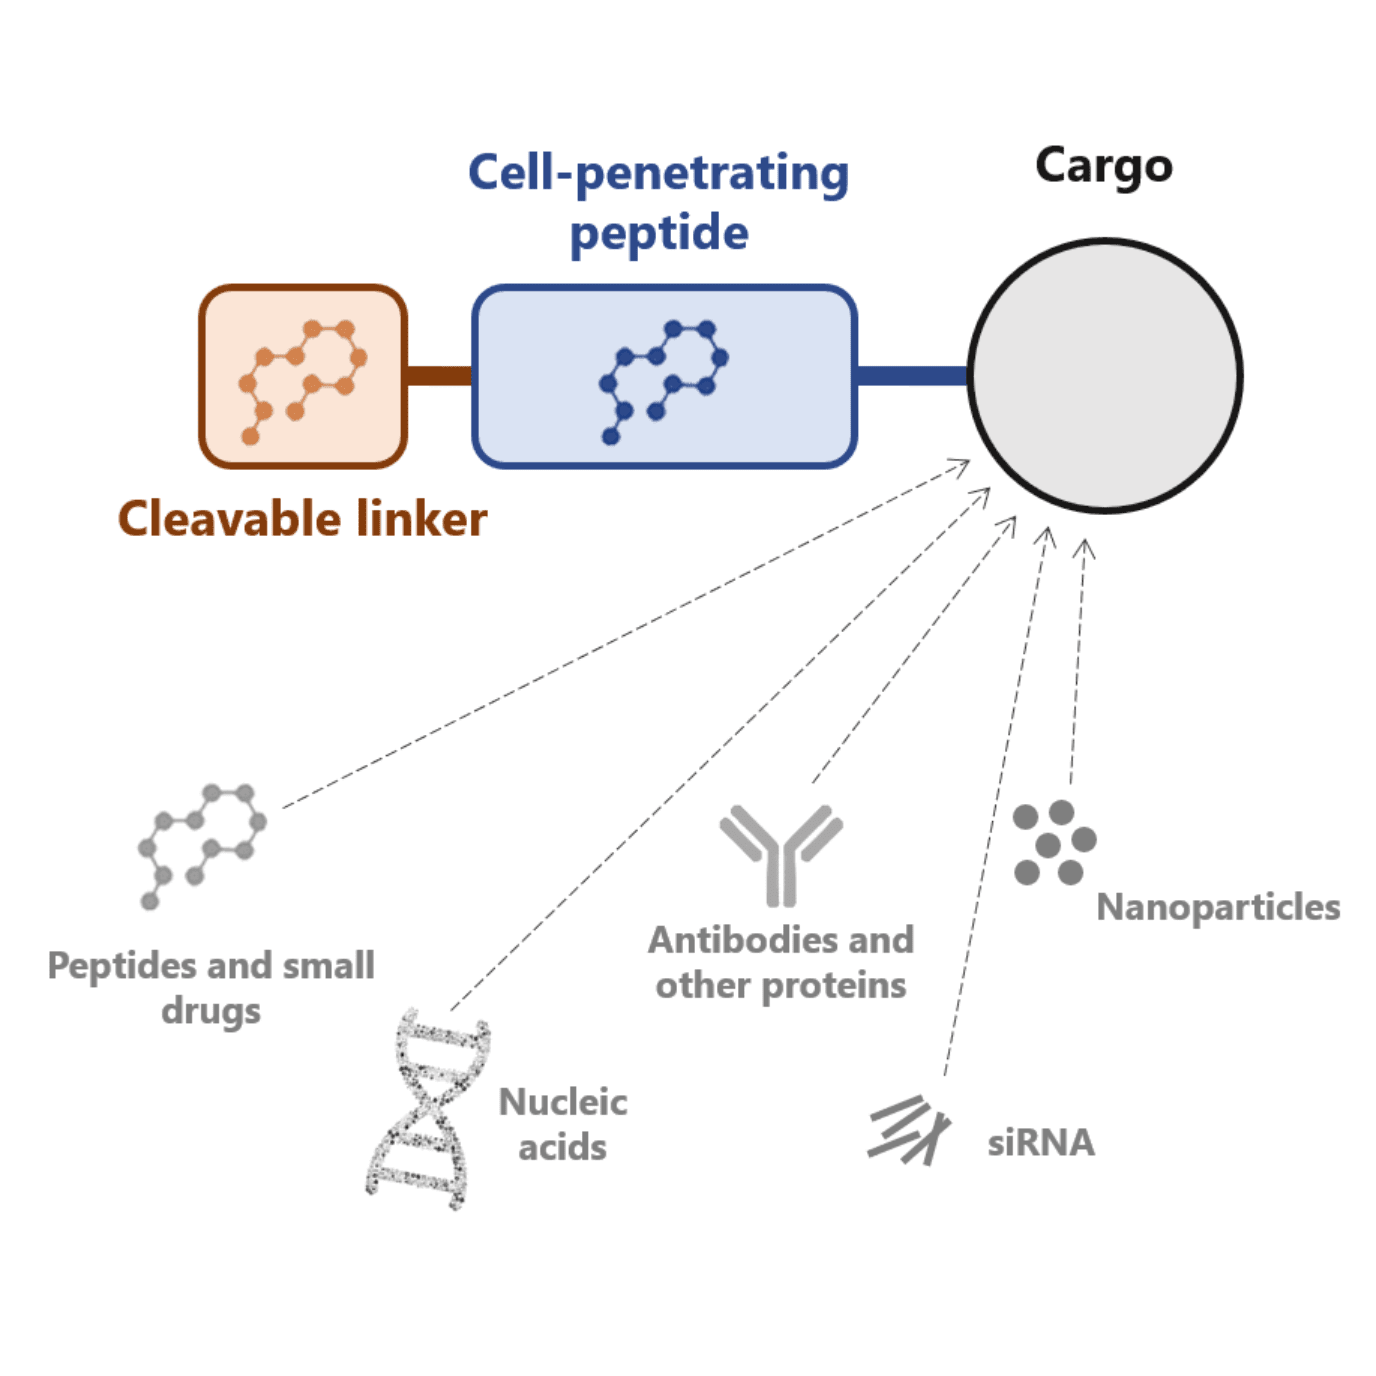 Cell-penentrating peptides